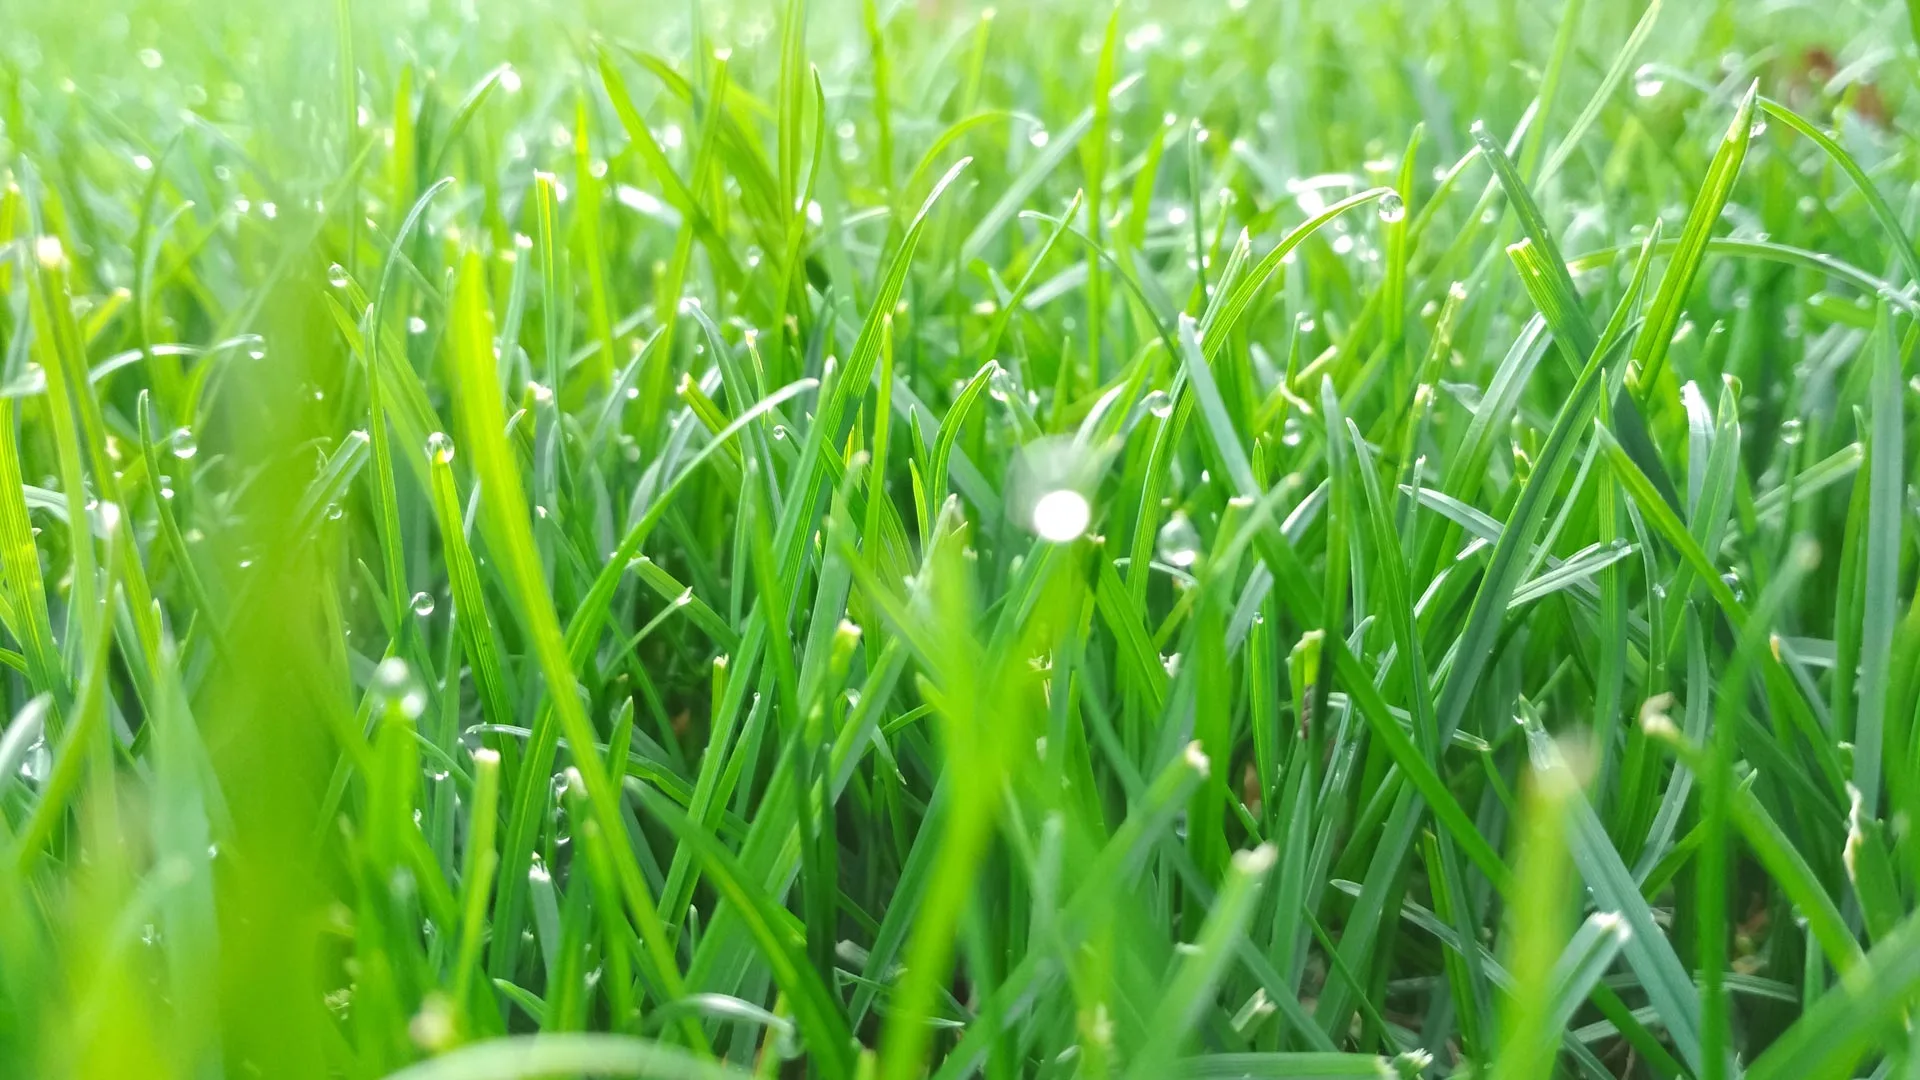 What Services Should Be Included in a Lawn Care Program?